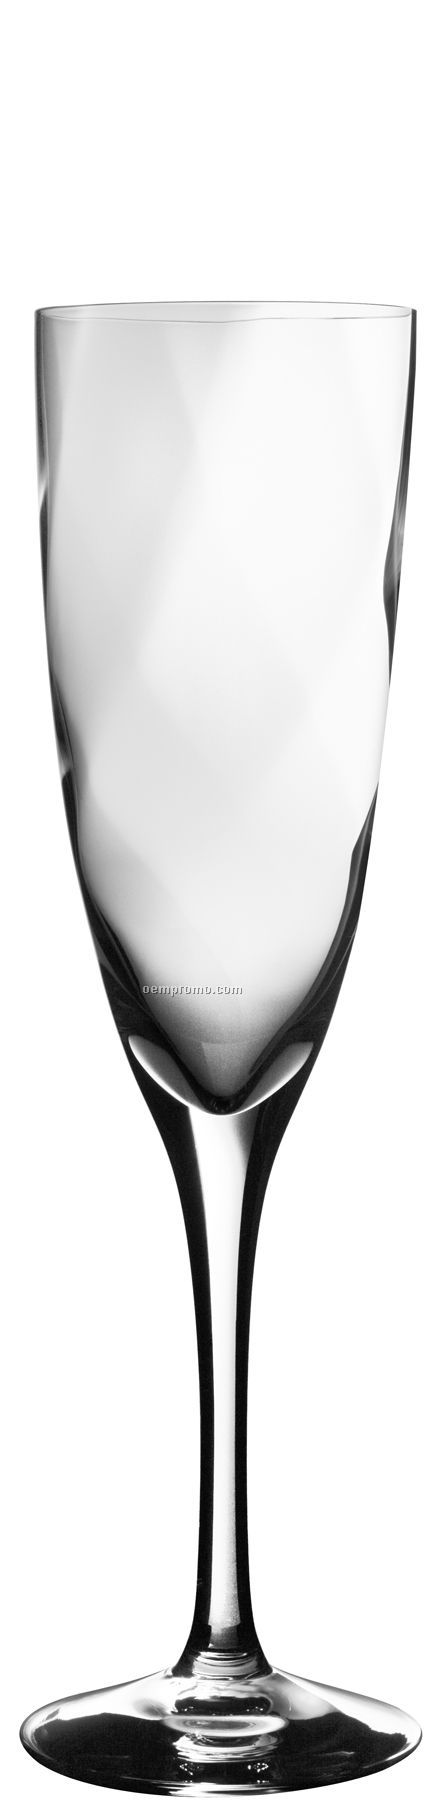 Chateau Crystal Champagne Stemware By Bertil Vallien